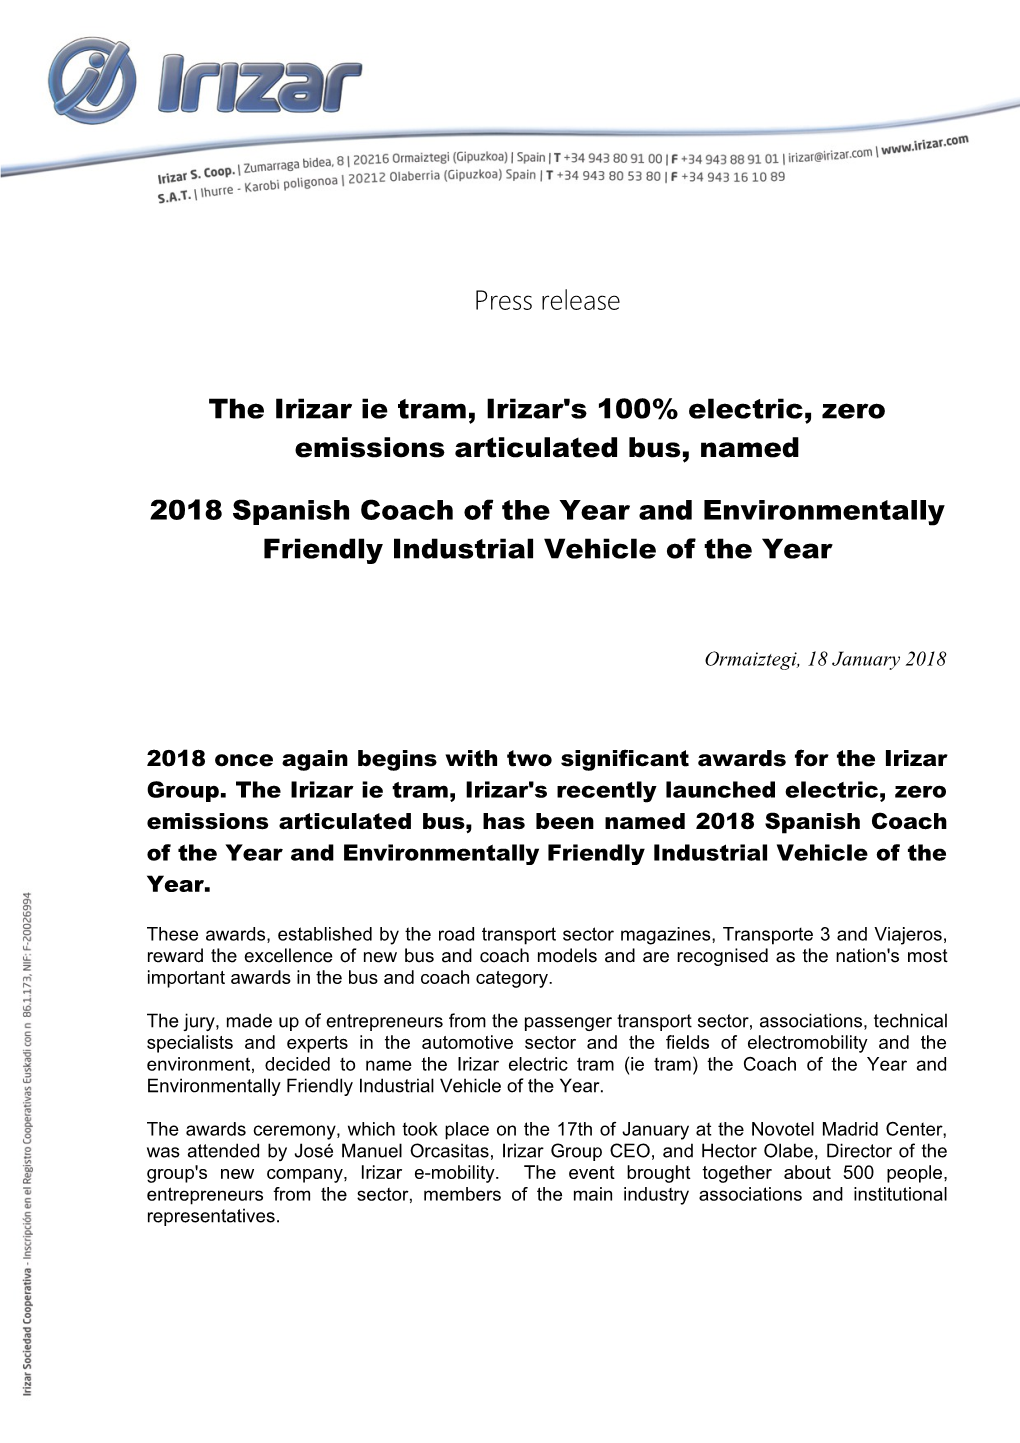 The Irizar Ie Tram, Irizar's 100% Electric, Zero Emissions Articulated Bus, Named